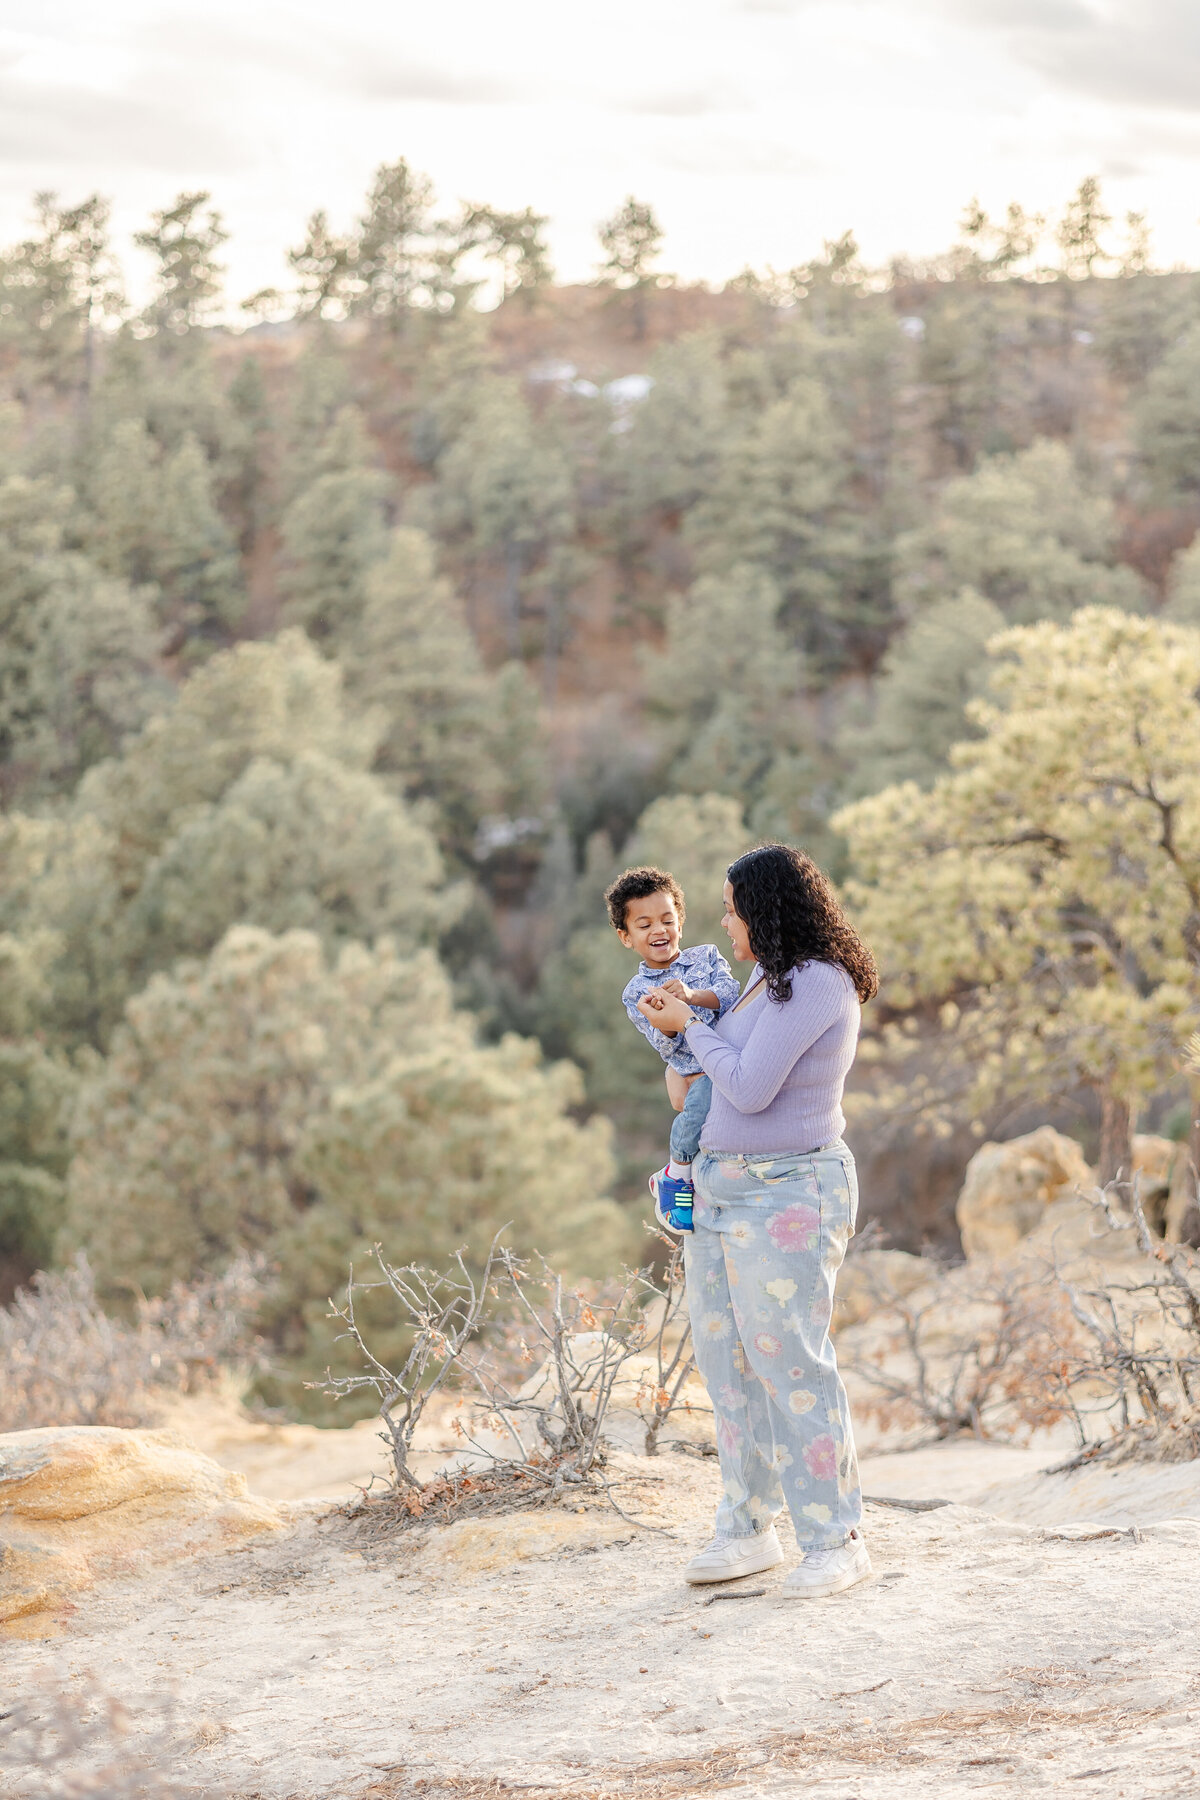 Colorado Springs Family Photographer - Mom holding young son in front of trees and mountains